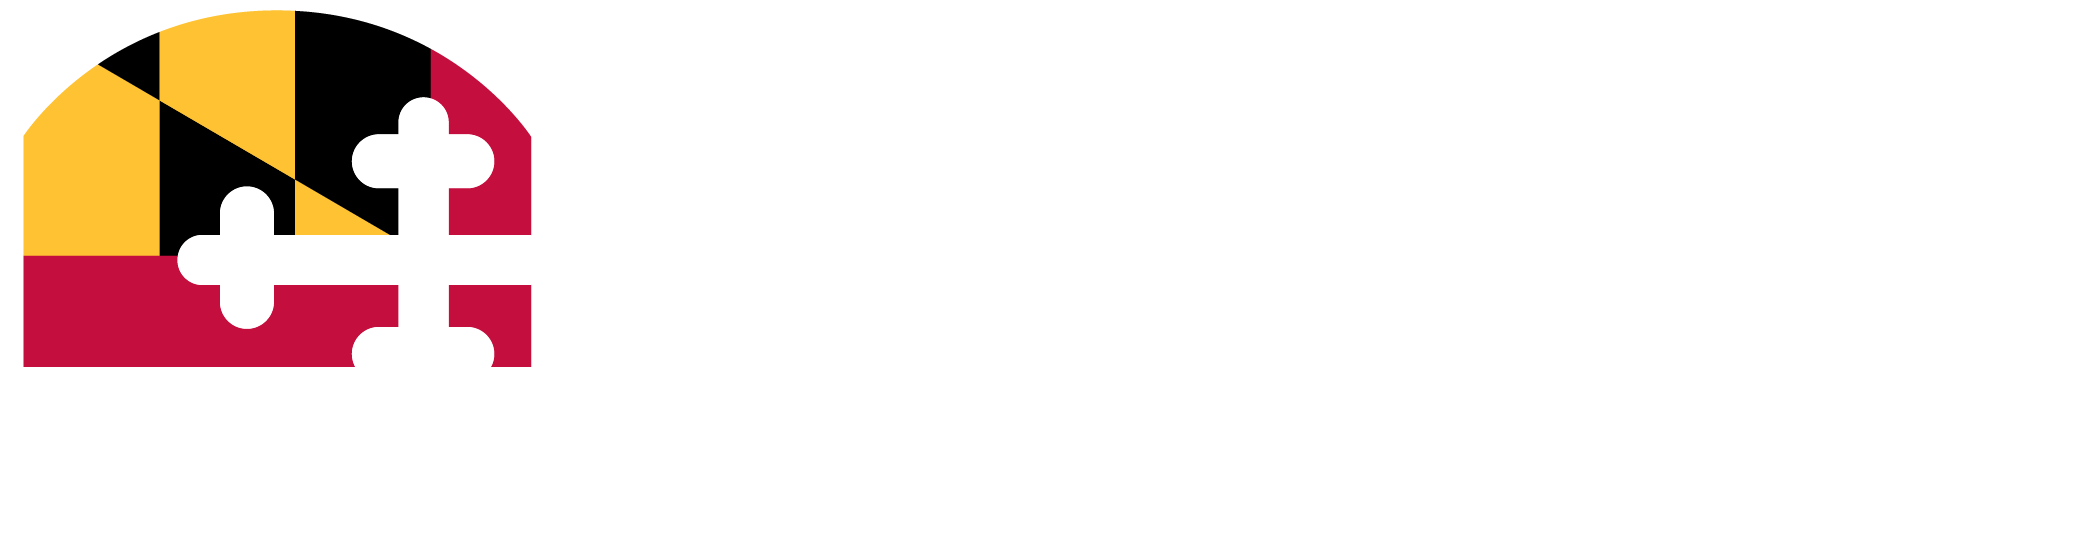 Maryland State Department of Education - Preparing world class students